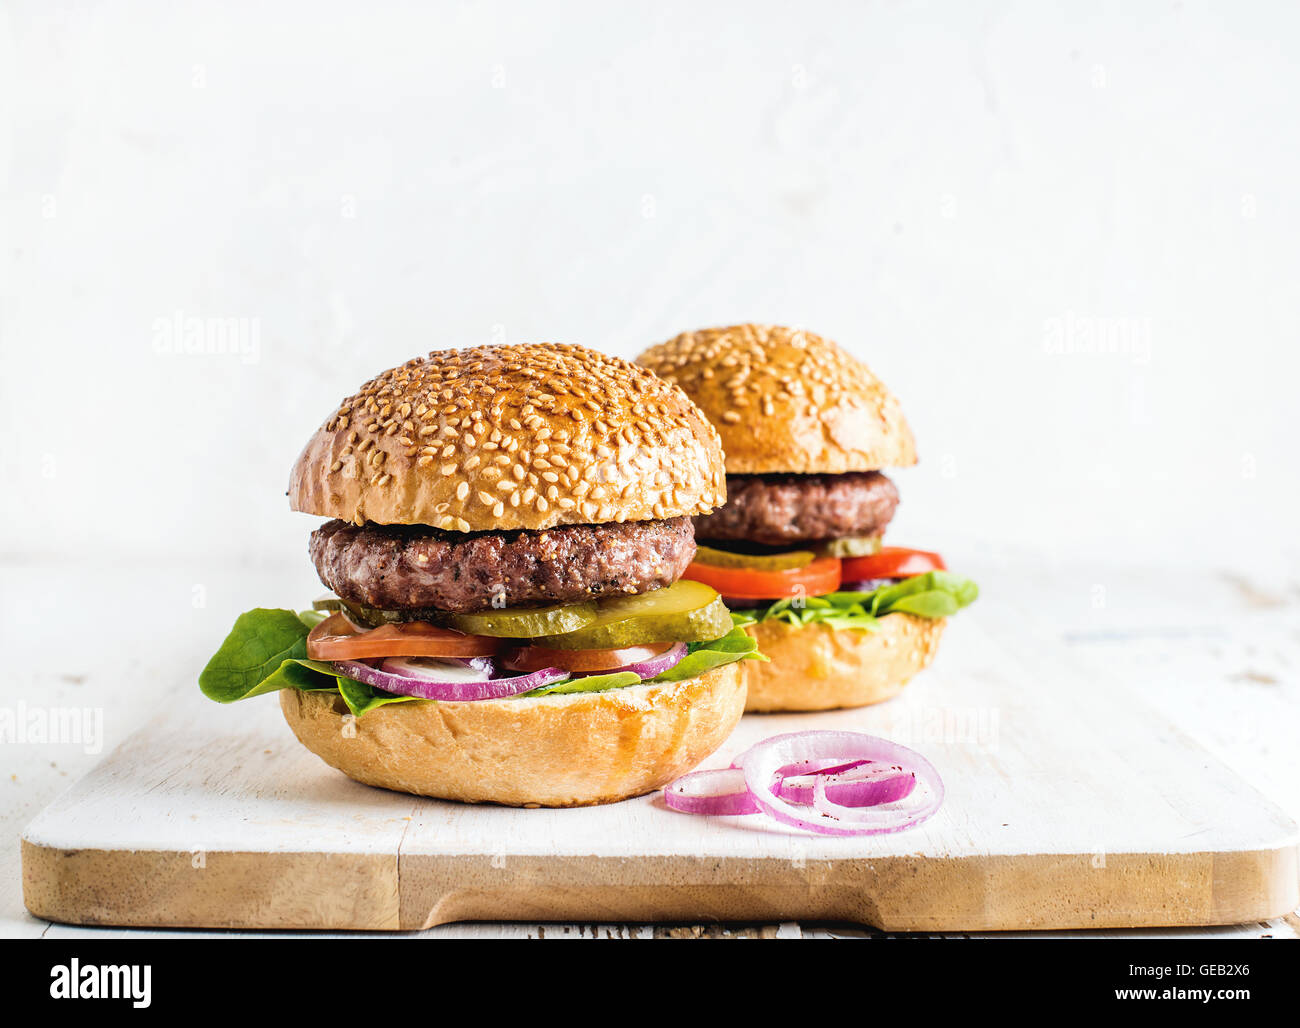 Fresh homemade burgers on wooden serving board with onion rings. Stock Photo